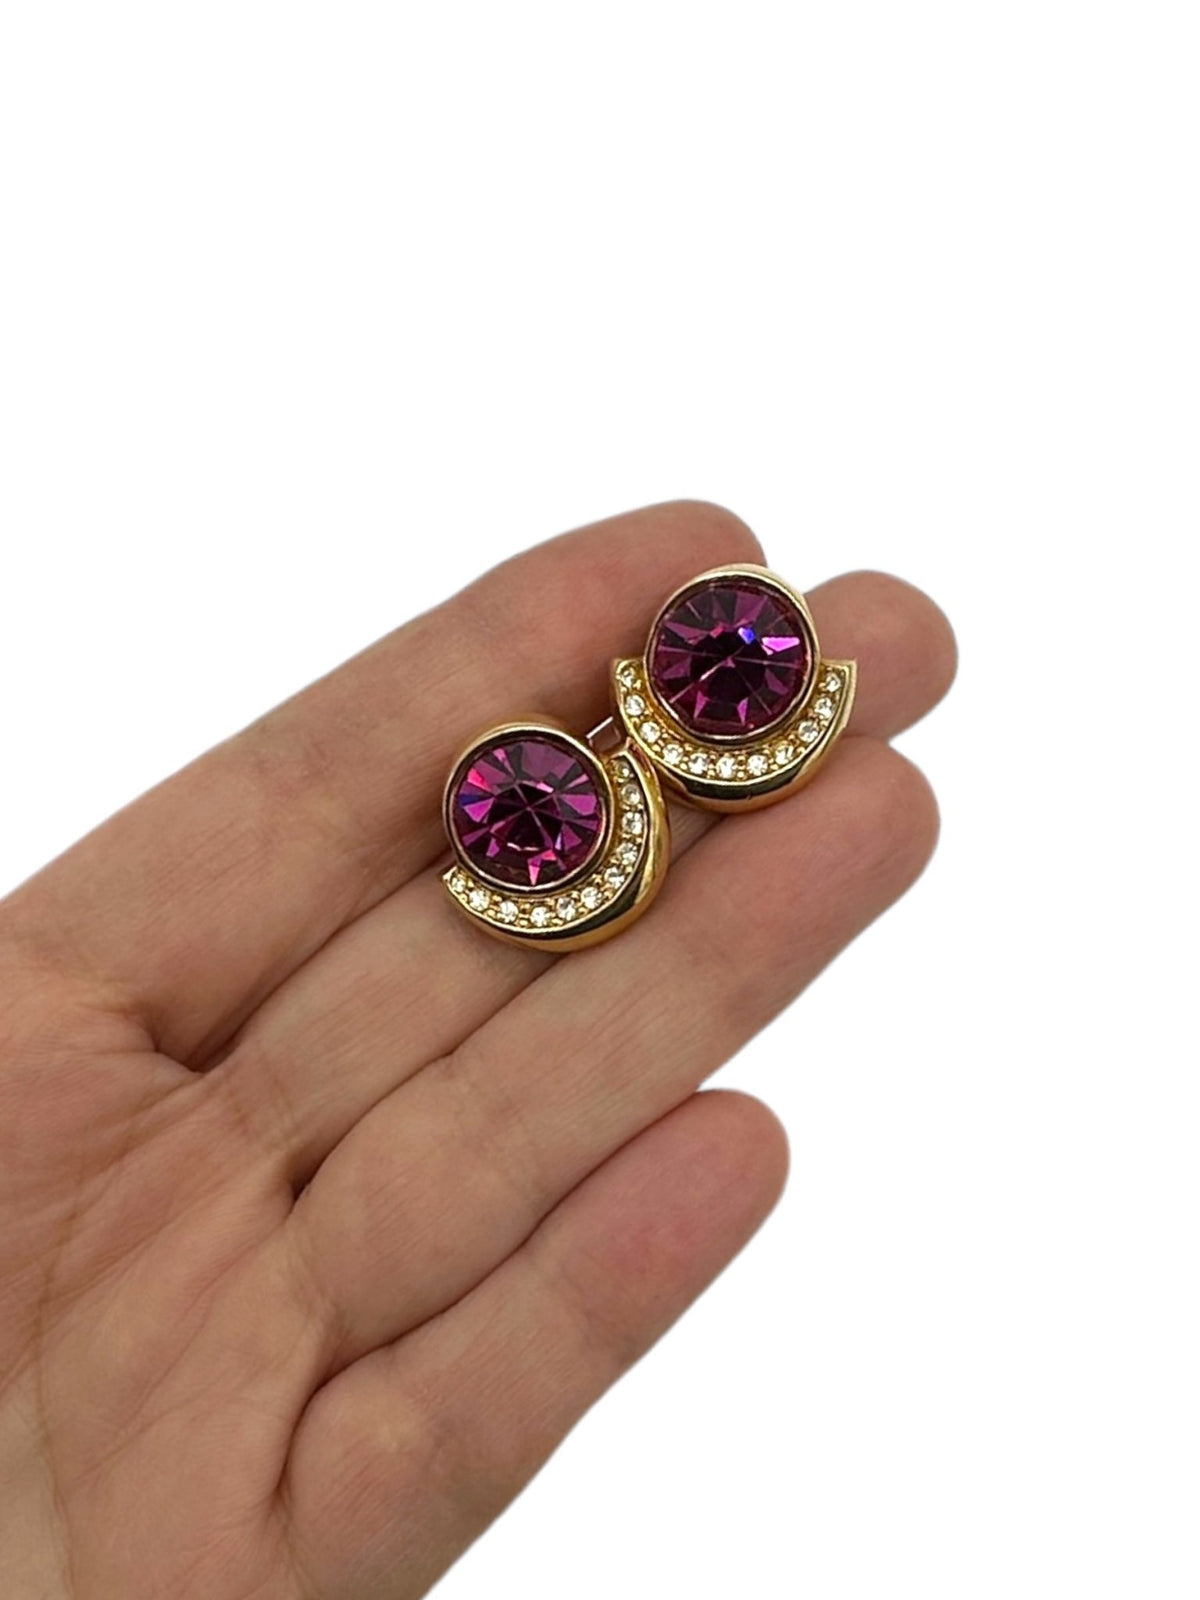 Gold Swarovski Pink Faceted Round Crystal Rhinestone Pierced Earrings - 24 Wishes Vintage Jewelry